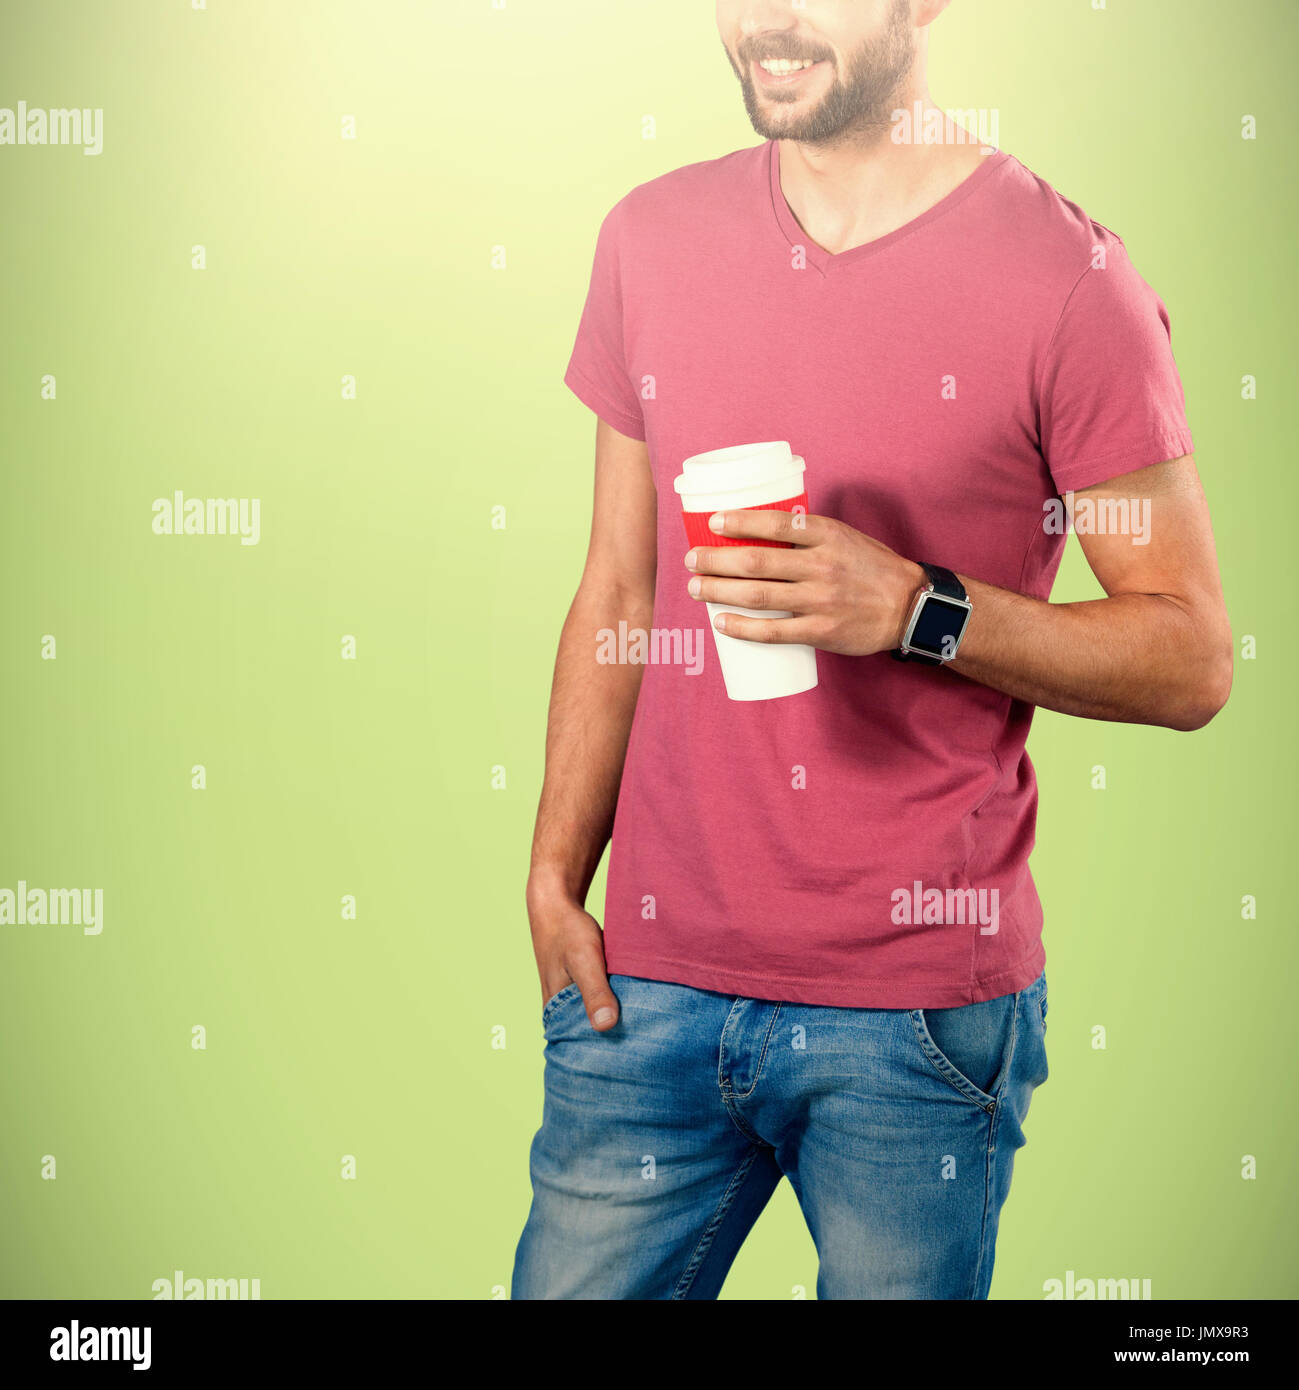 Midsection of smiling model holding disposable coffee cup against green background Stock Photo